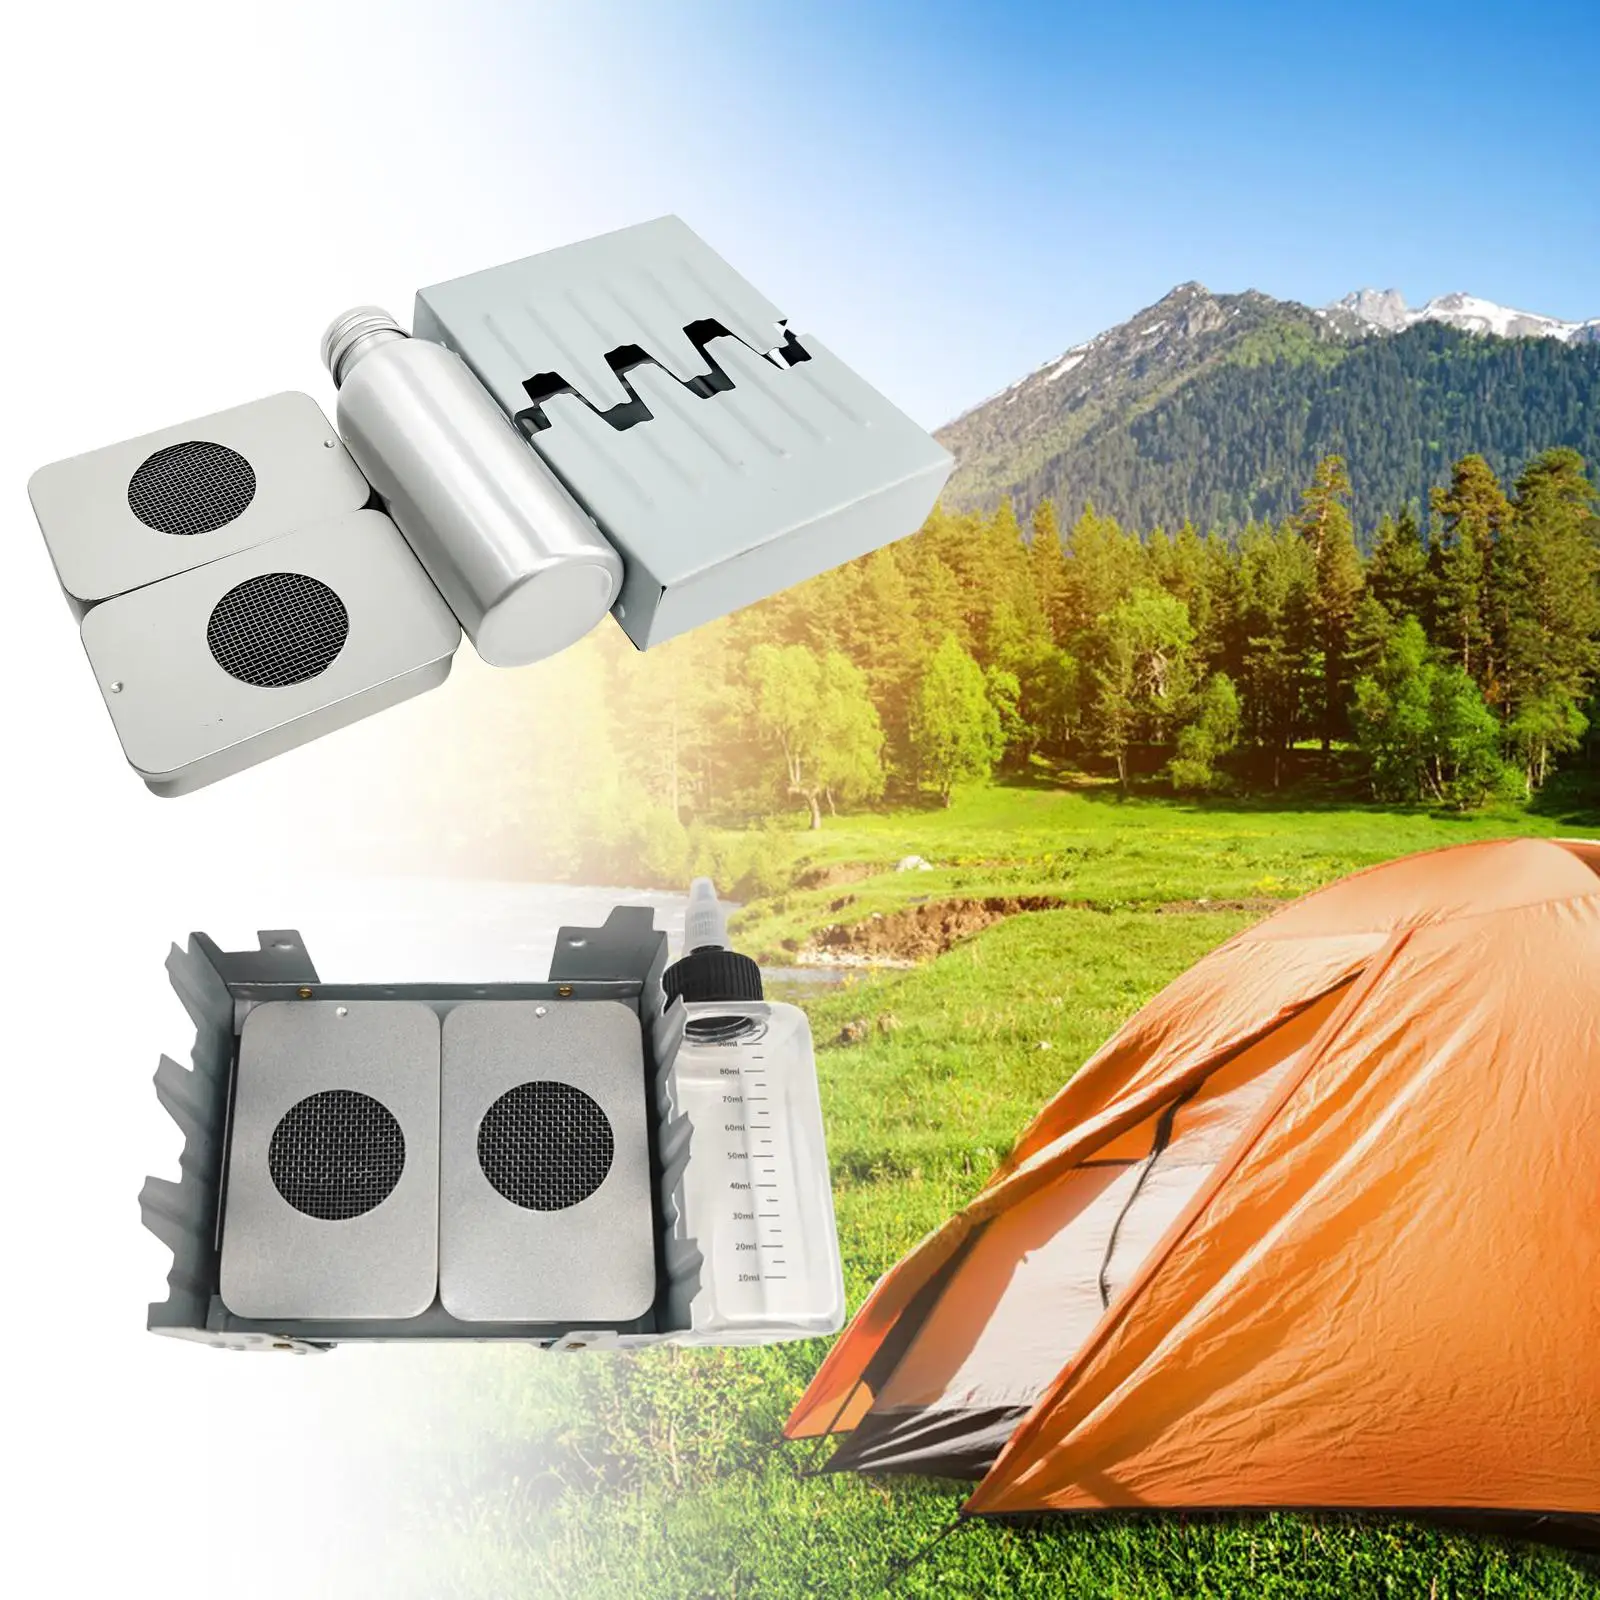 Mini Camping Stoves Set DIY Accessories Lightweight Storage Pocket Heater for